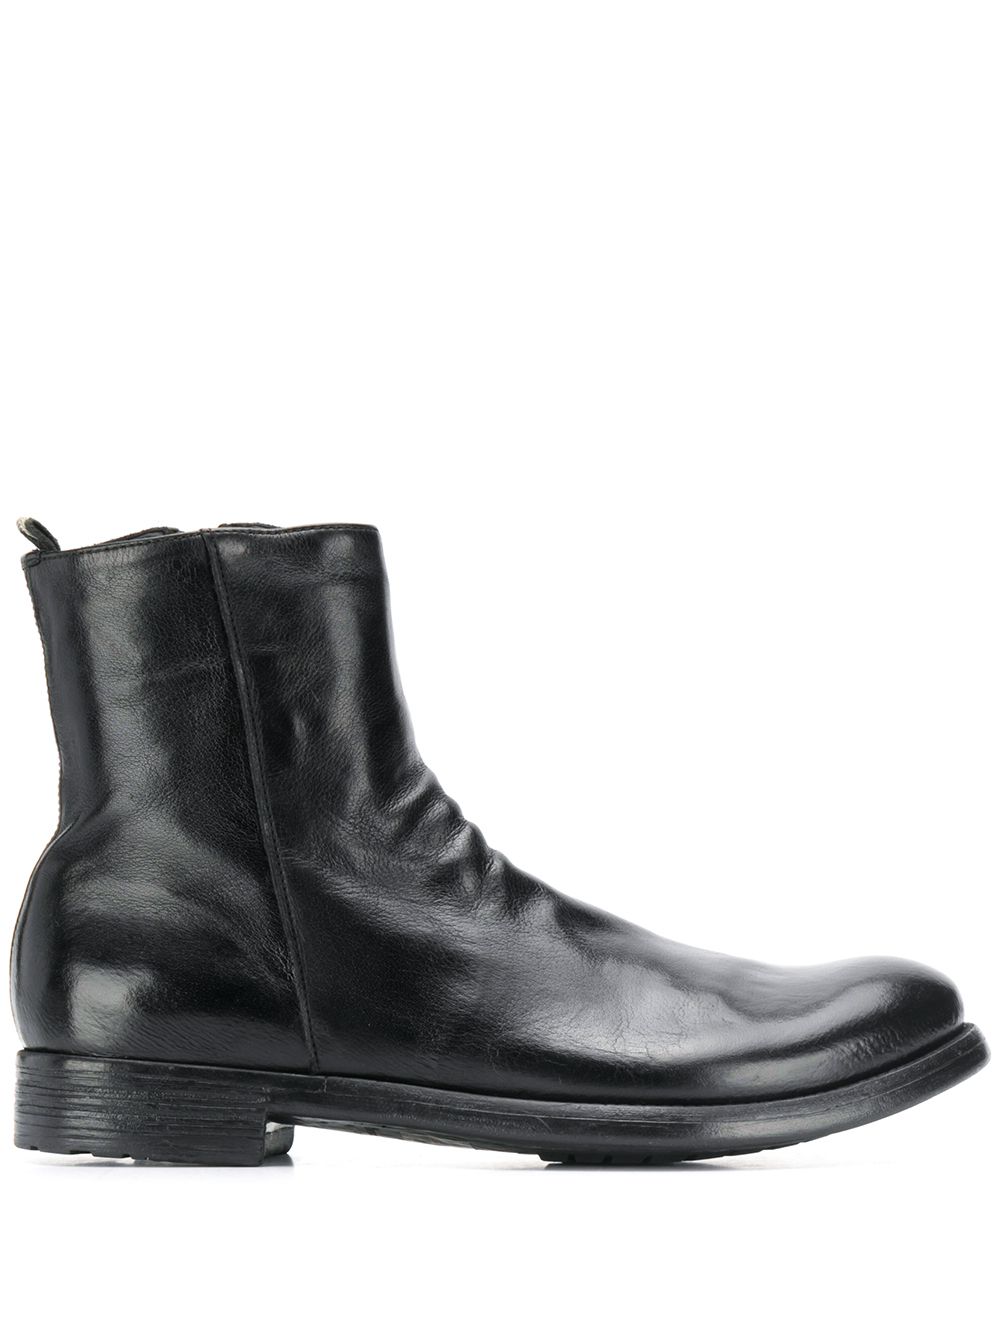 OFFICINE CREATIVE ANKLE BOOTS